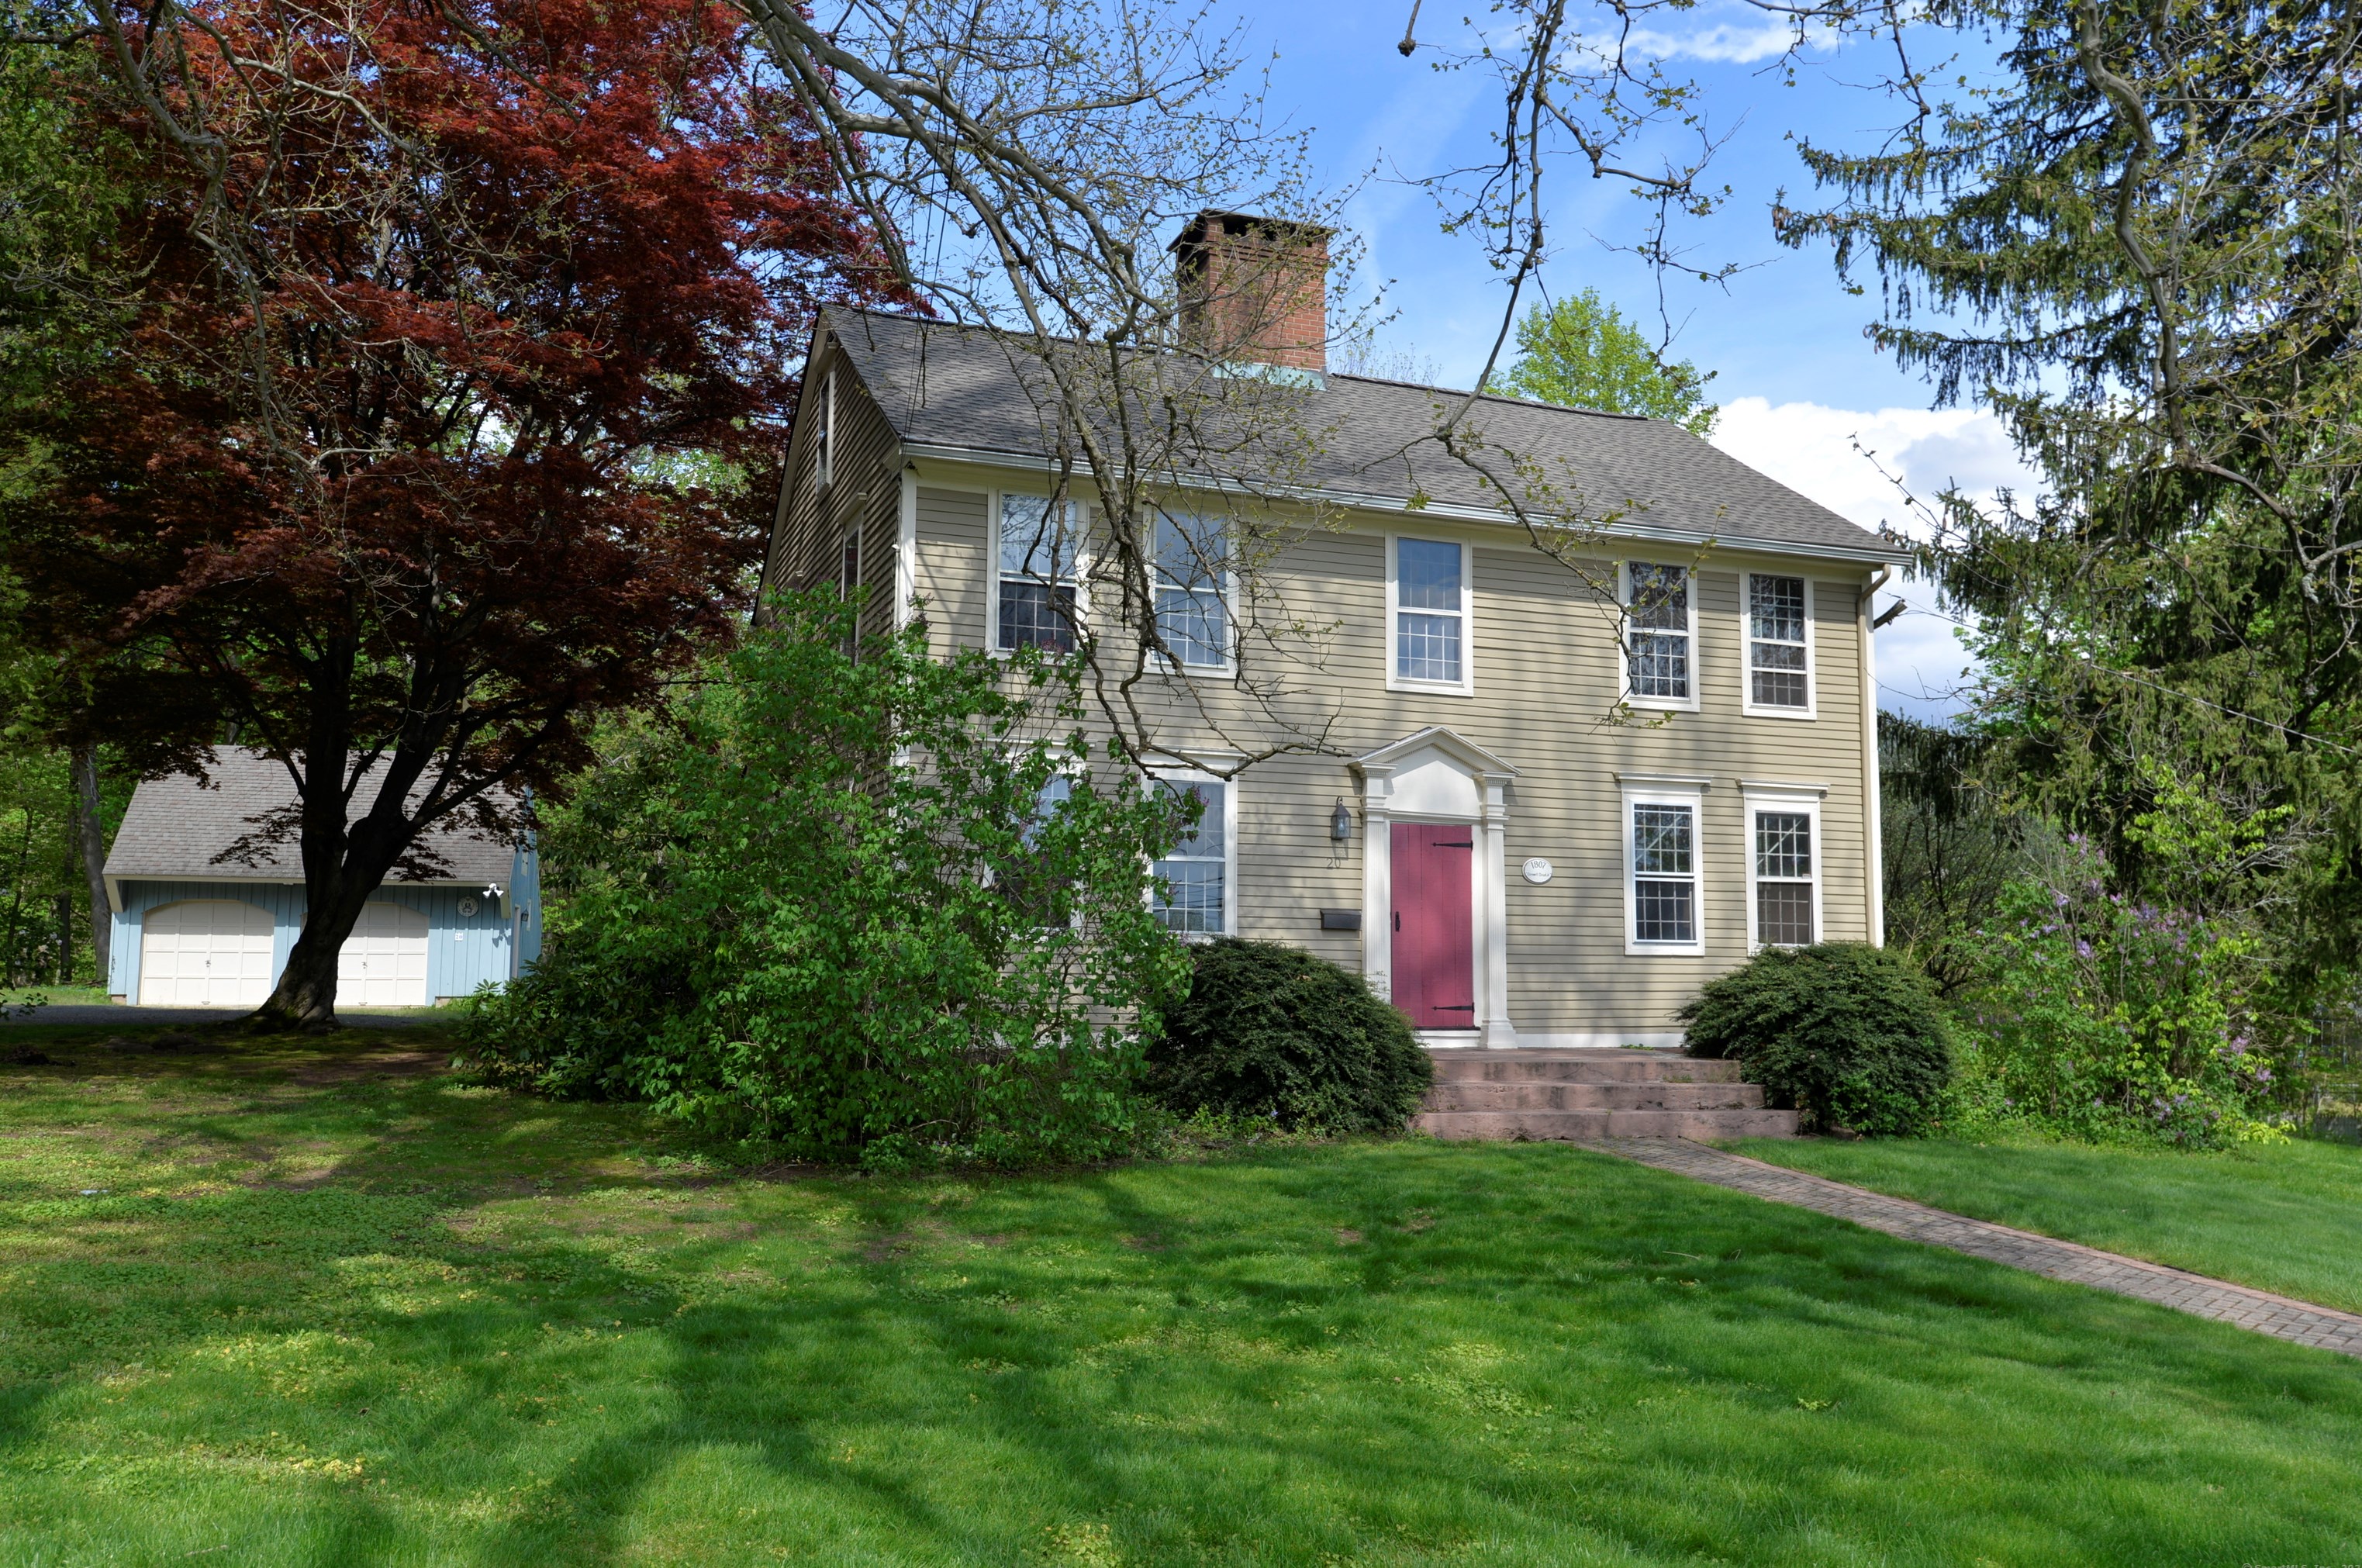 20 West St, Cromwell, CT 06416